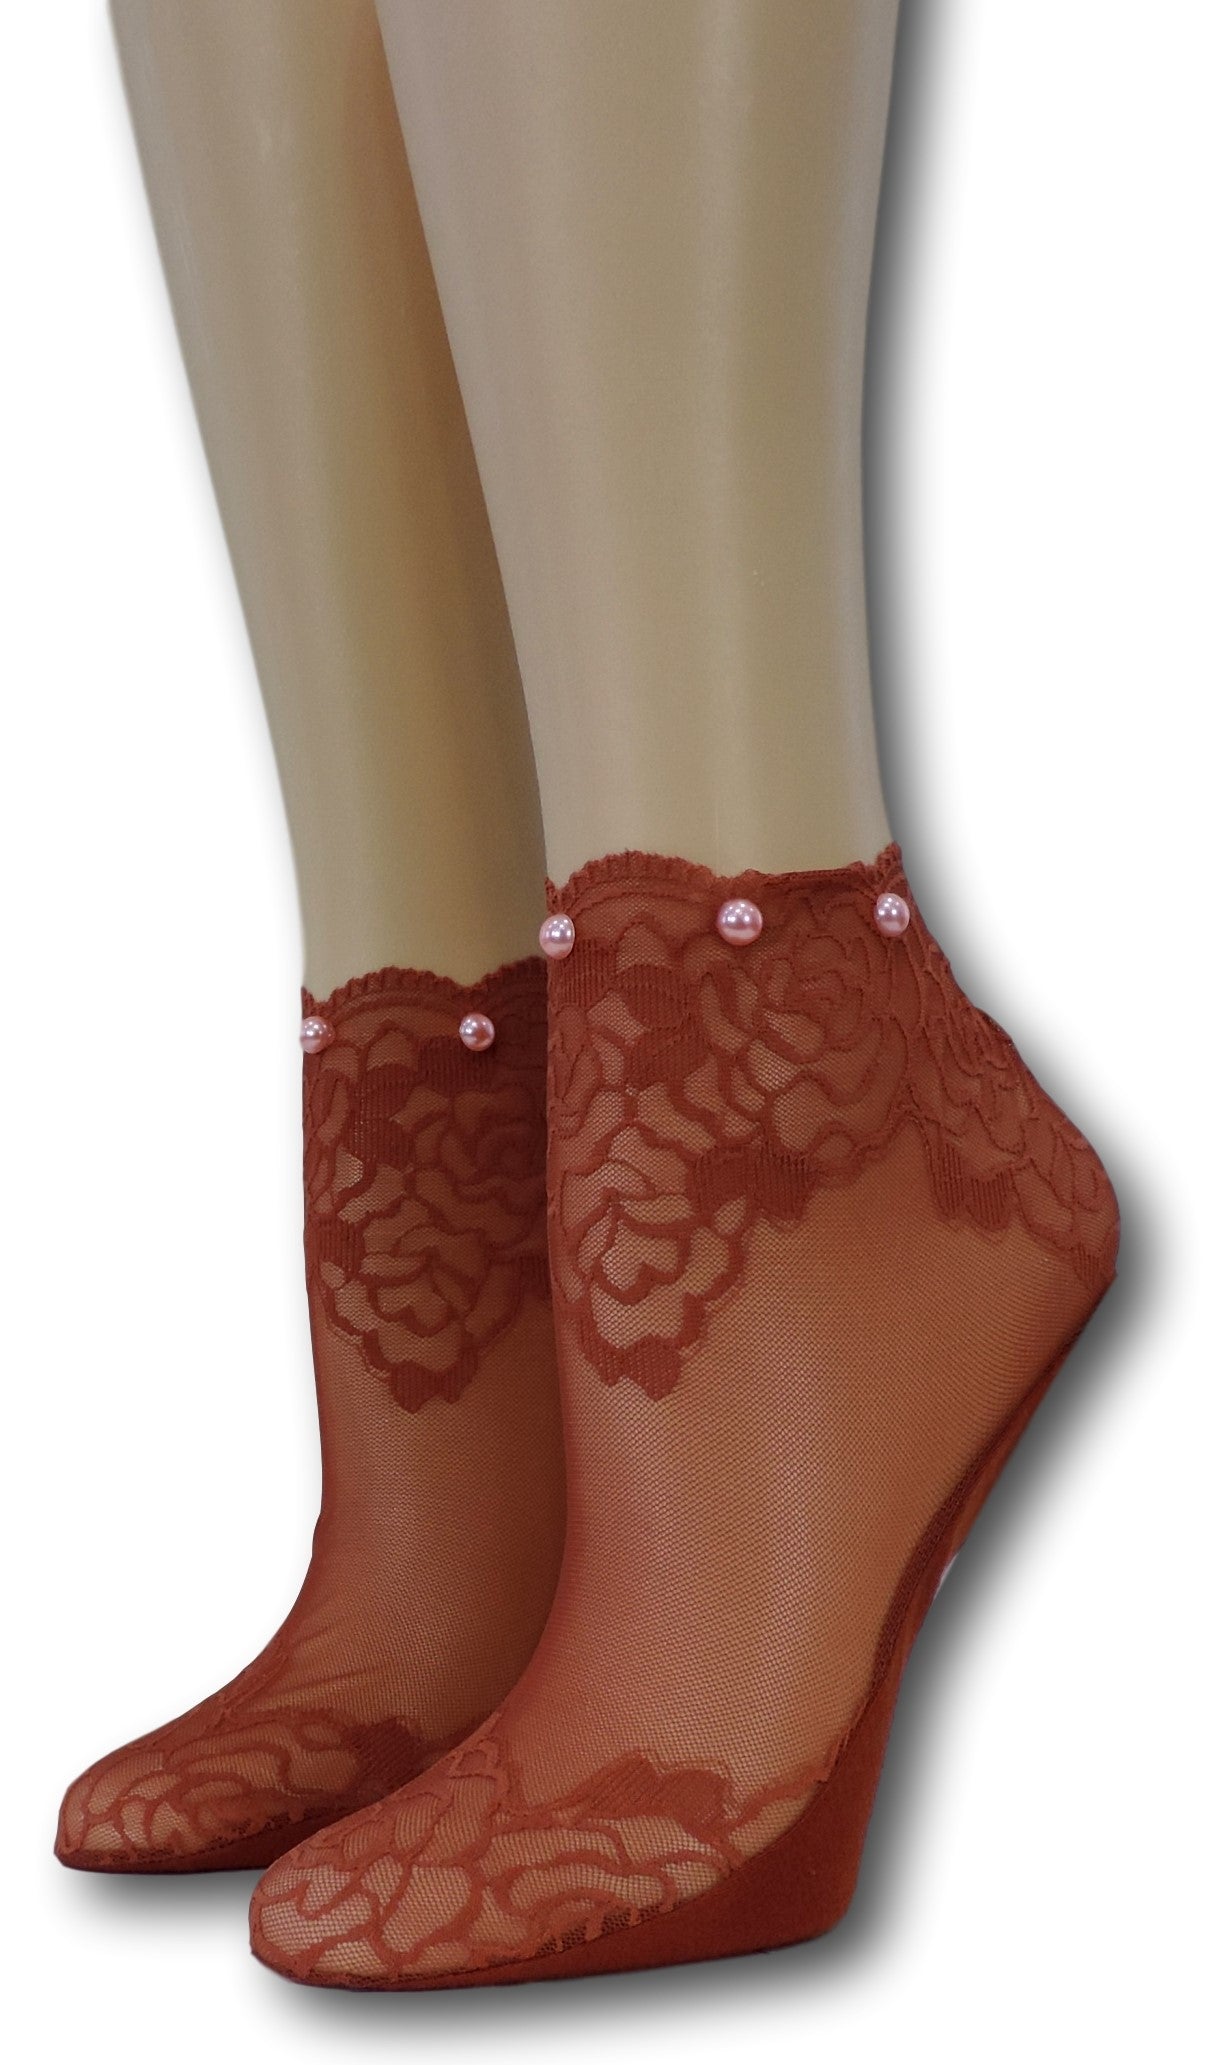 Red Rose Ankle Sheer Socks with beads